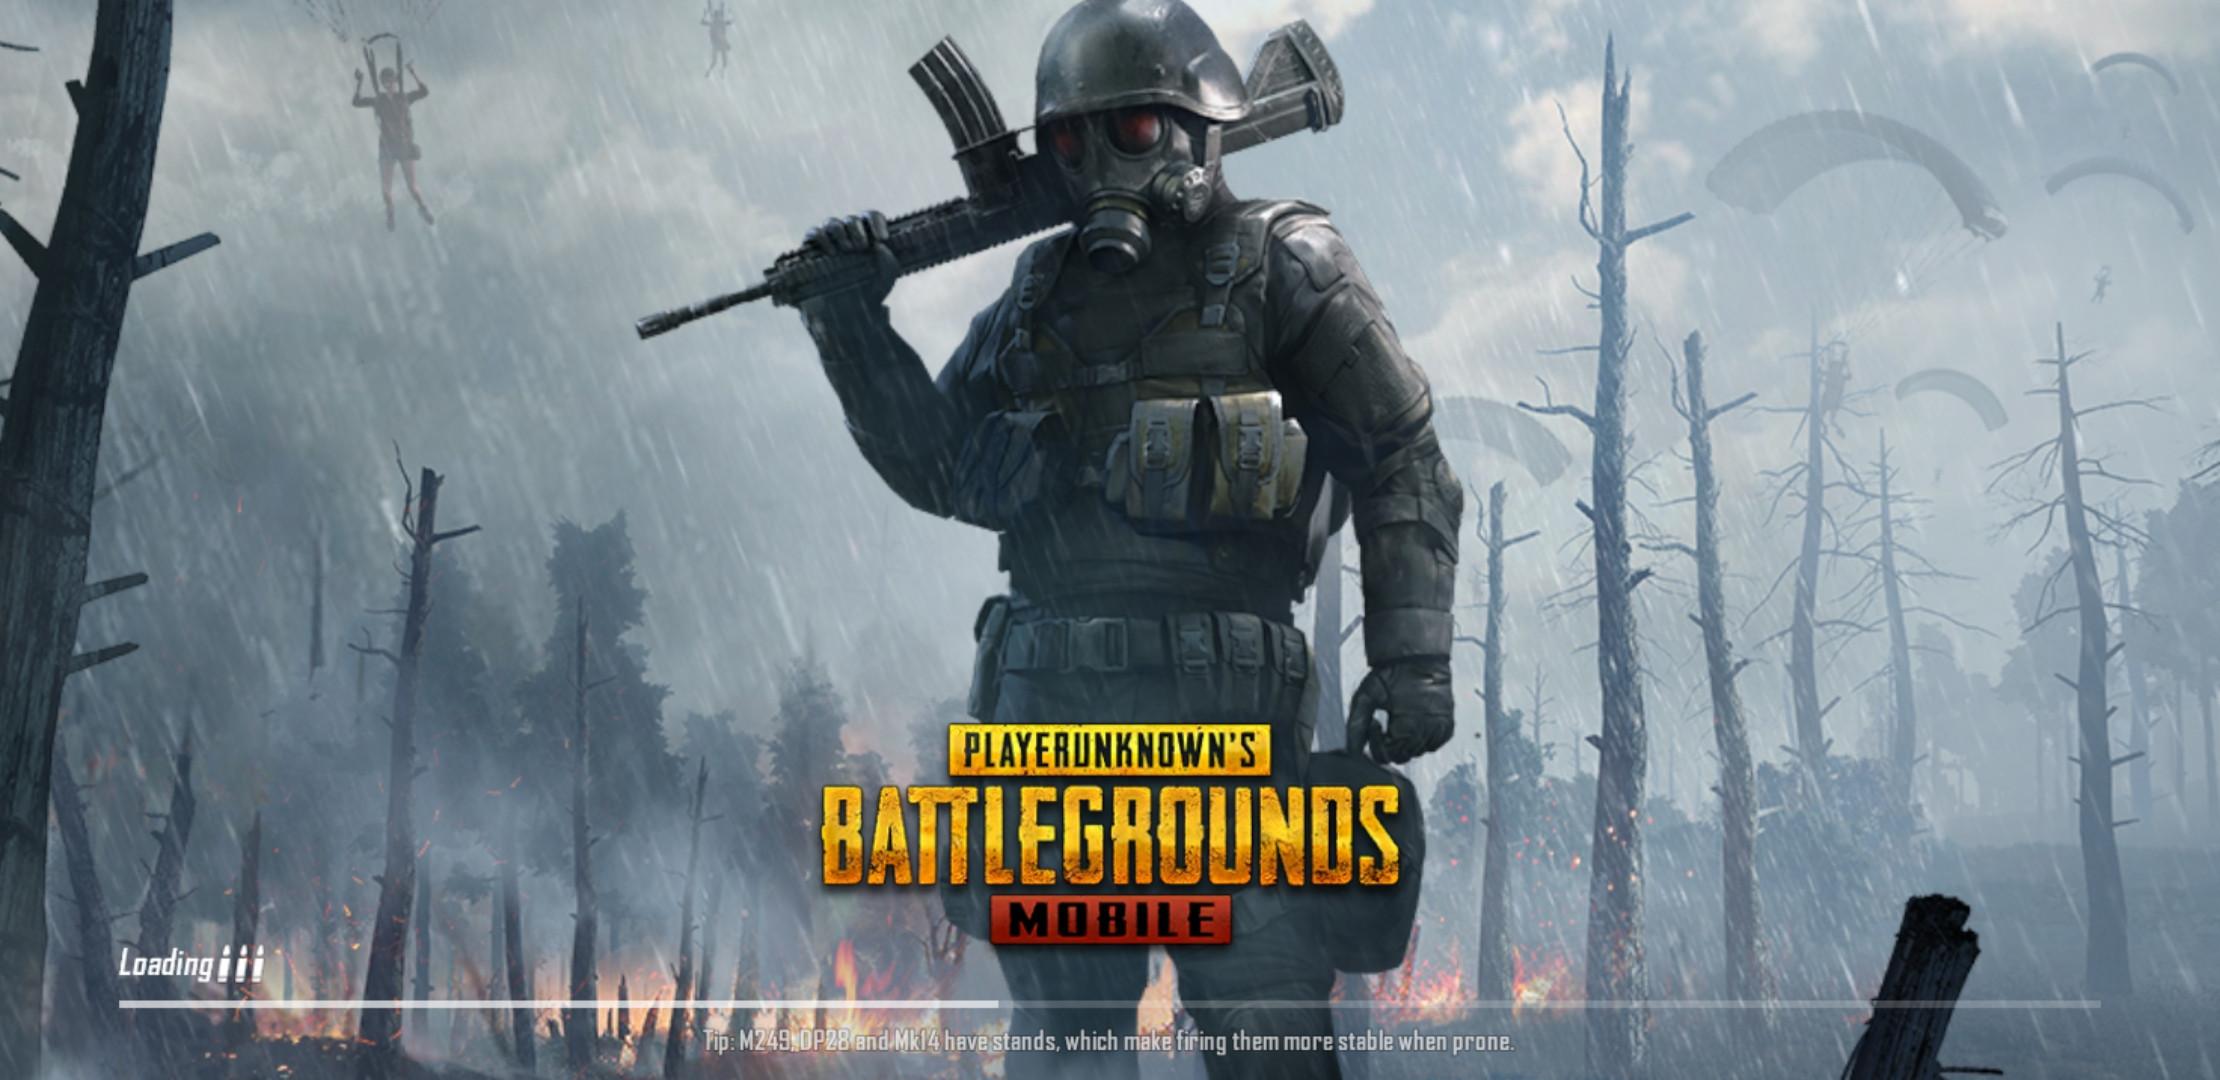 Best PUBG Wallpaper HD Download For Mobile & PC 2020